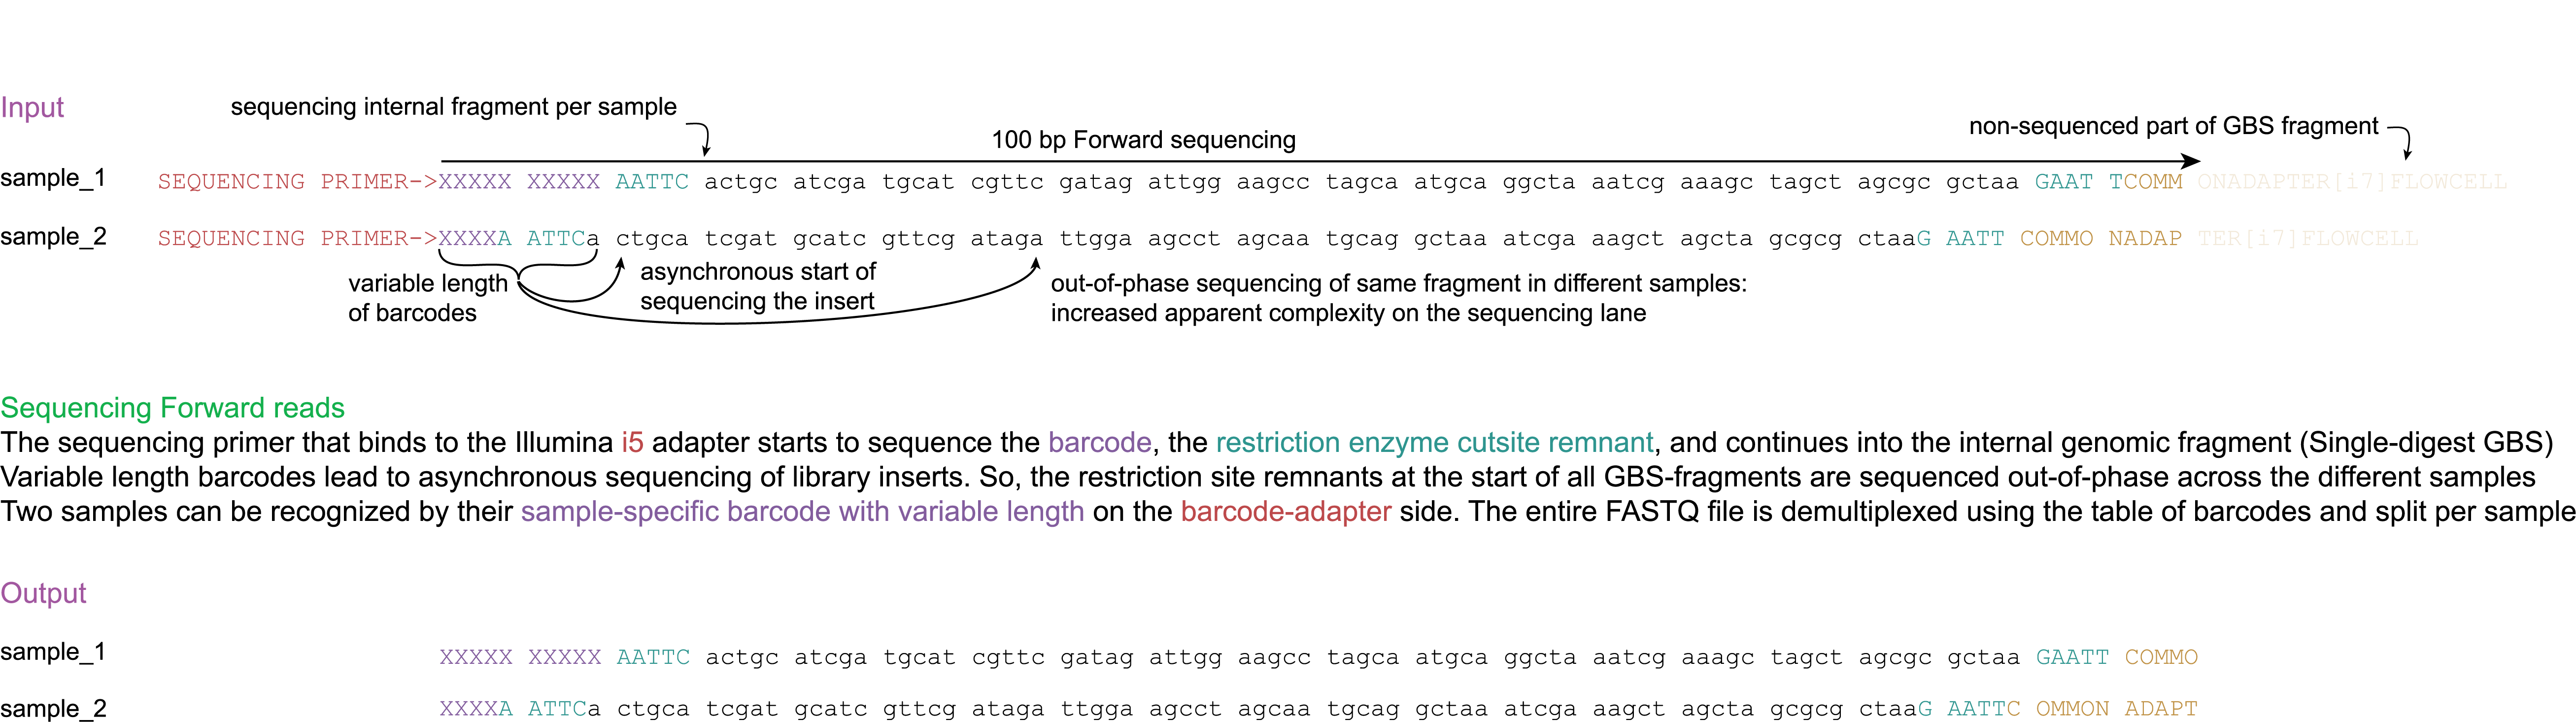 _images/E_sequencing_Forward_100bp.png